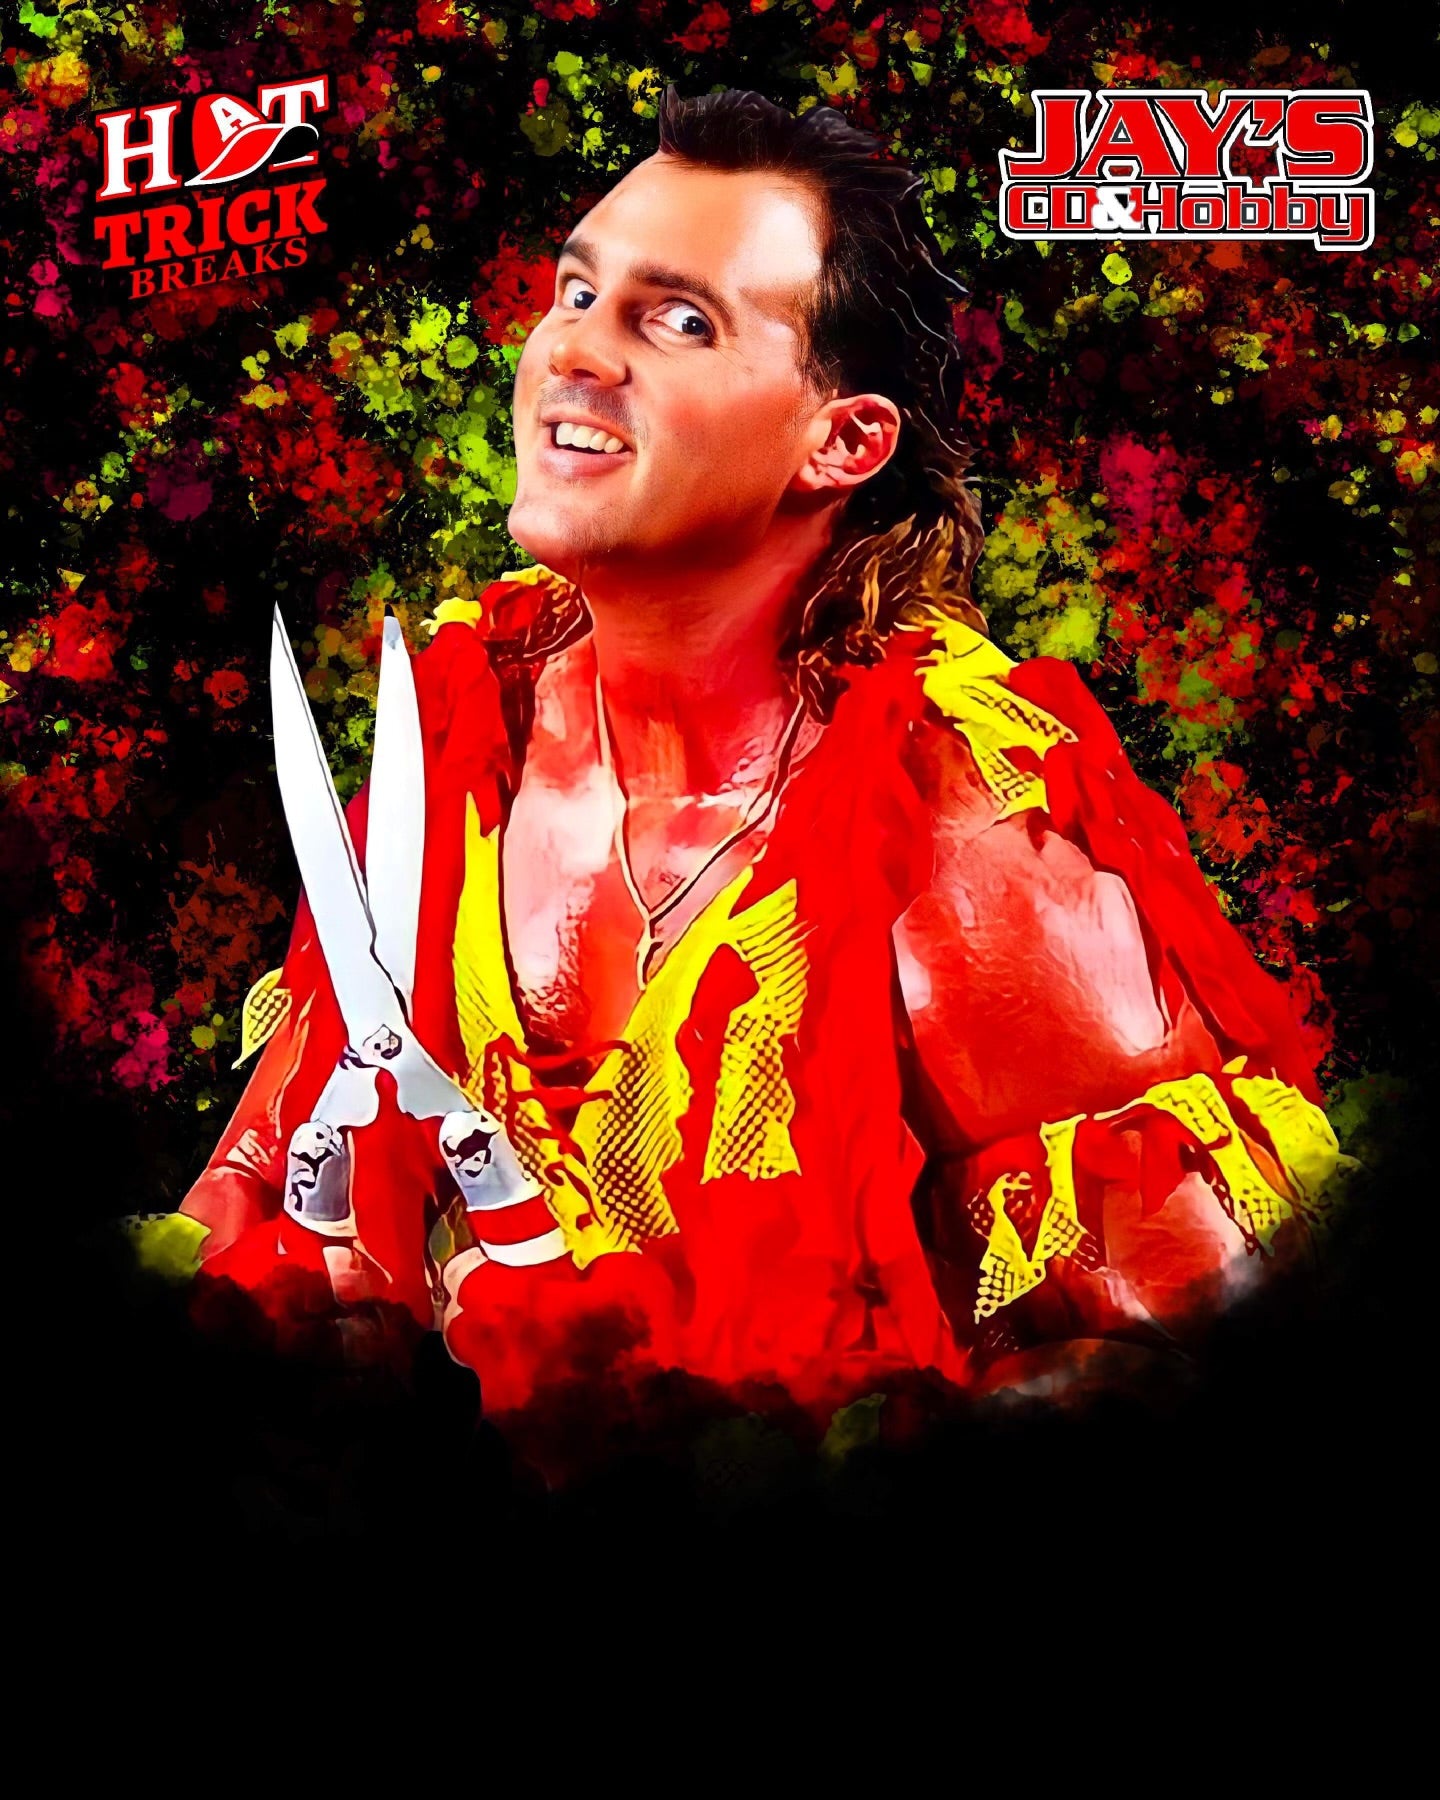 Brutus Beefcake Signing Event (Presale Tickets Sold Out - Walk-Ins Welcome At The Venue)